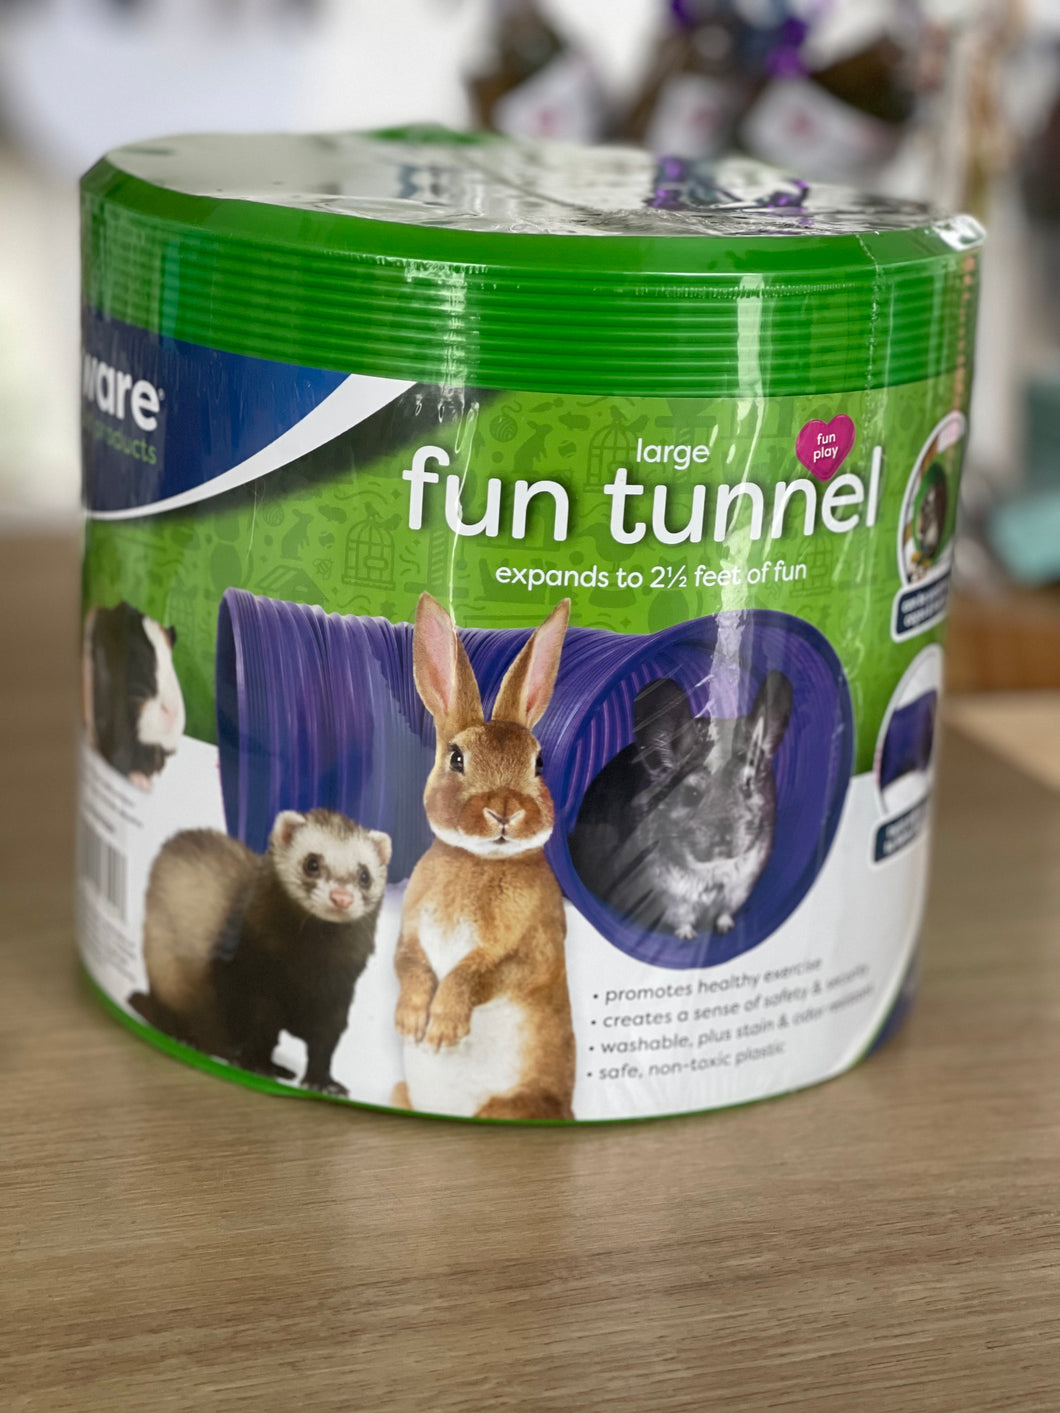 🔴 Grand tunnel pour petits animaux extensible